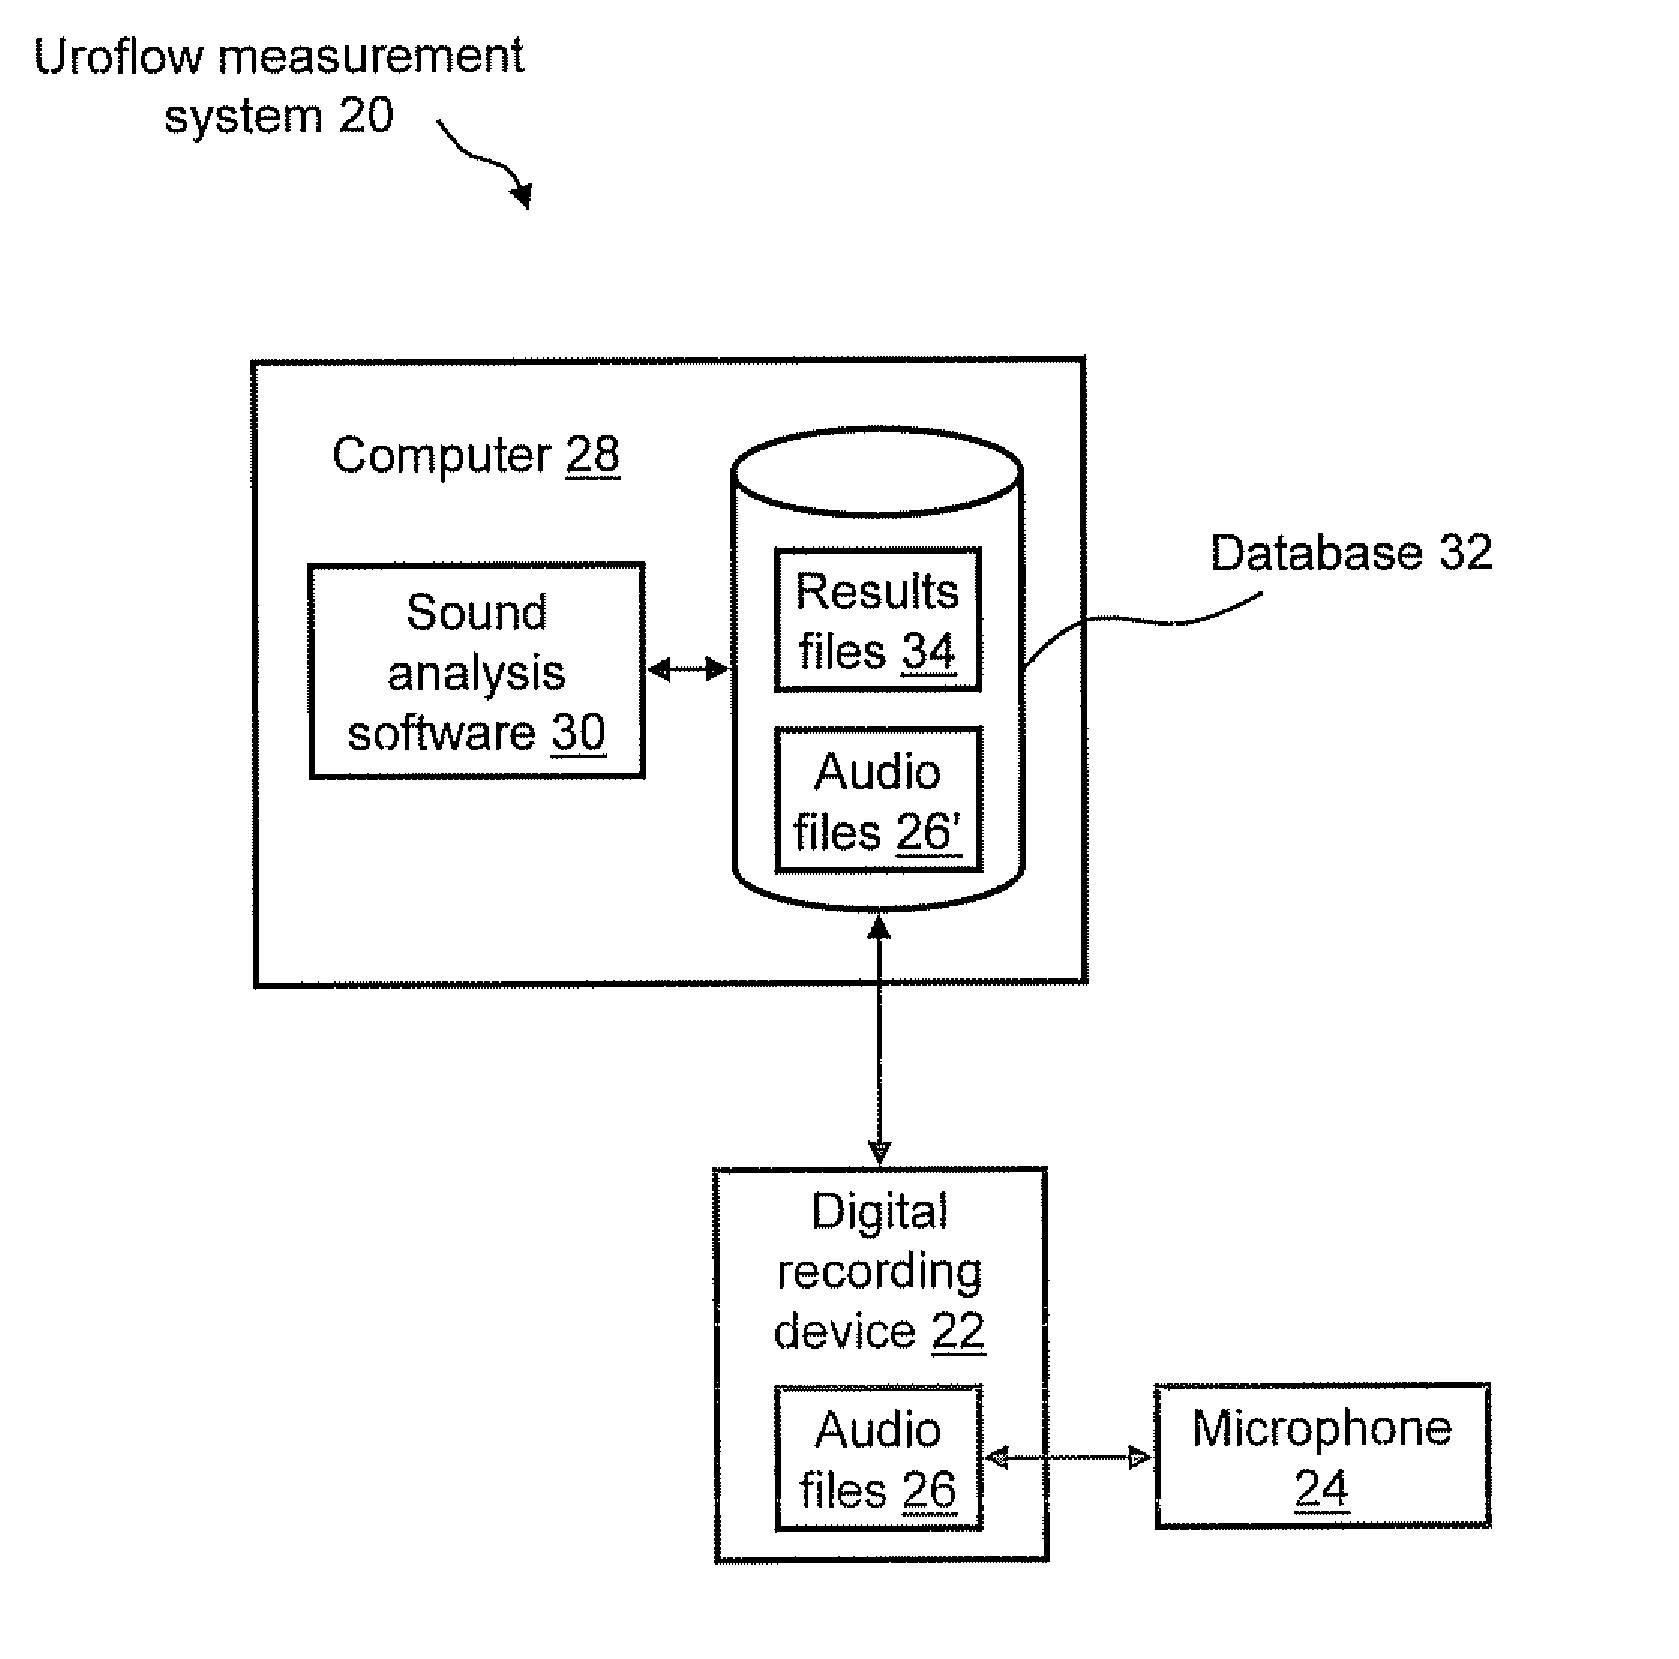 Systems for and Methods of Assessing Urinary Flow Rate Via Sound Analysis